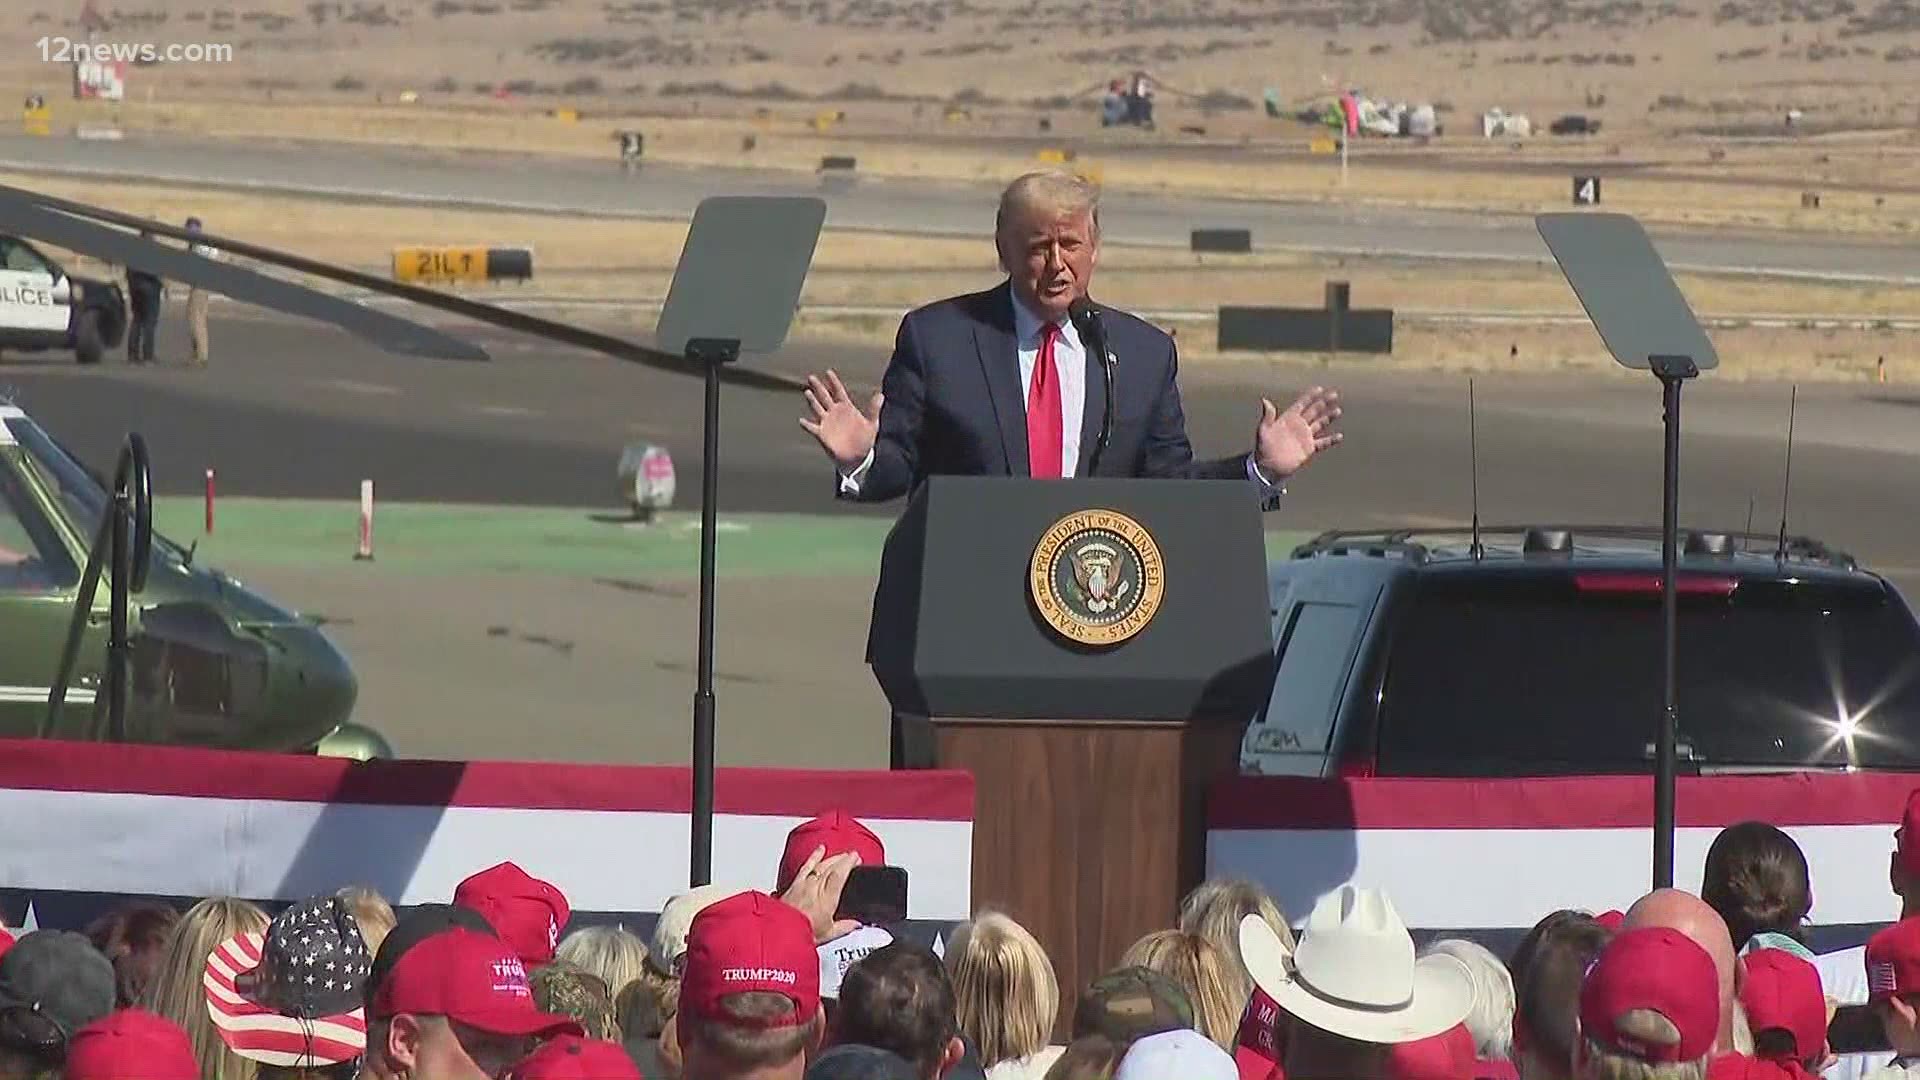 Get out and vote was Trump's main message at a campaign rally in Prescott, AZ on Monday. But even when that message is mixed, his supporters get what he's saying.